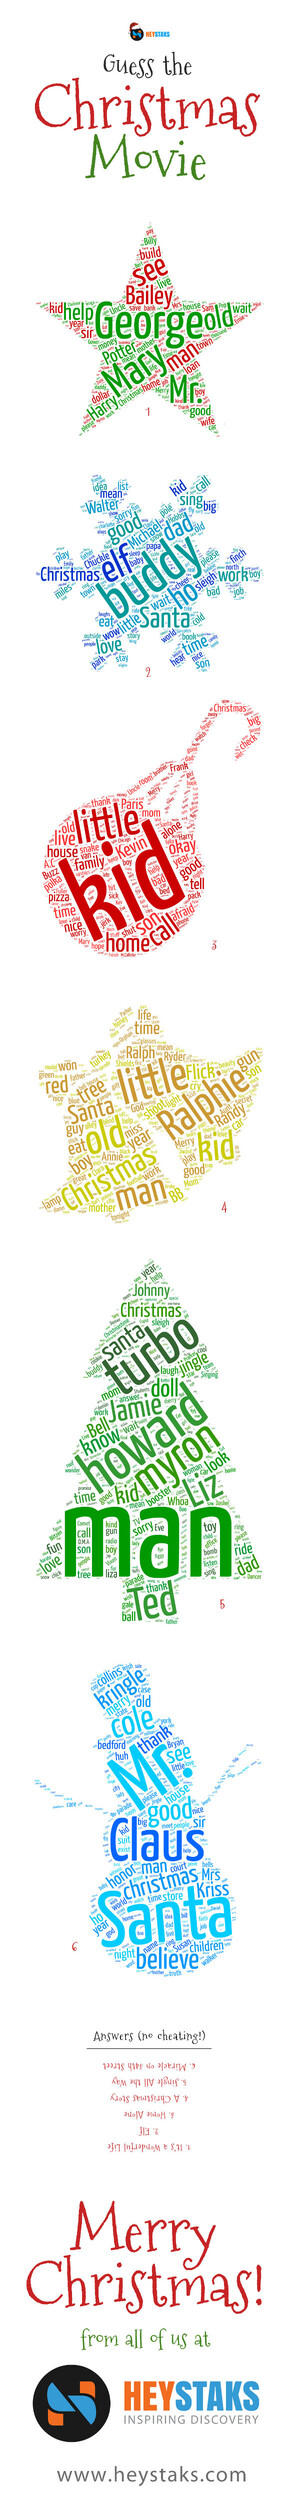 Guess-the-Christmas-Movie-Word-Clouds_HeyStaks